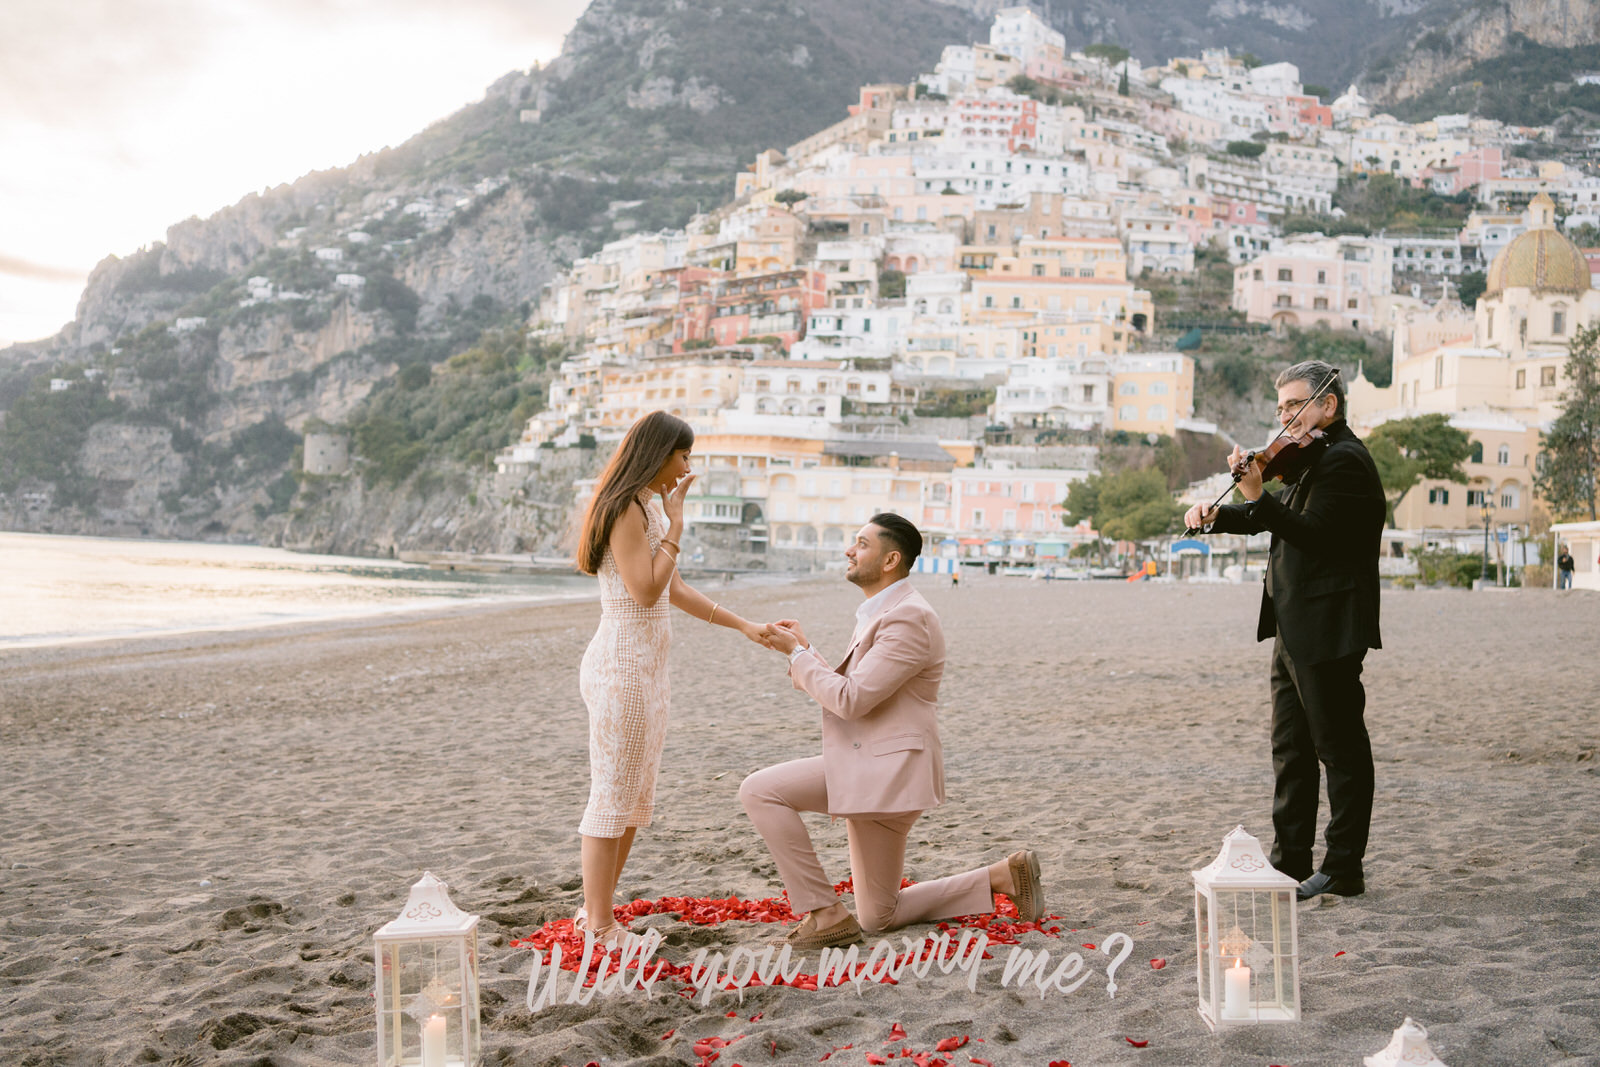 Proposing on the beach of Positano in Italy